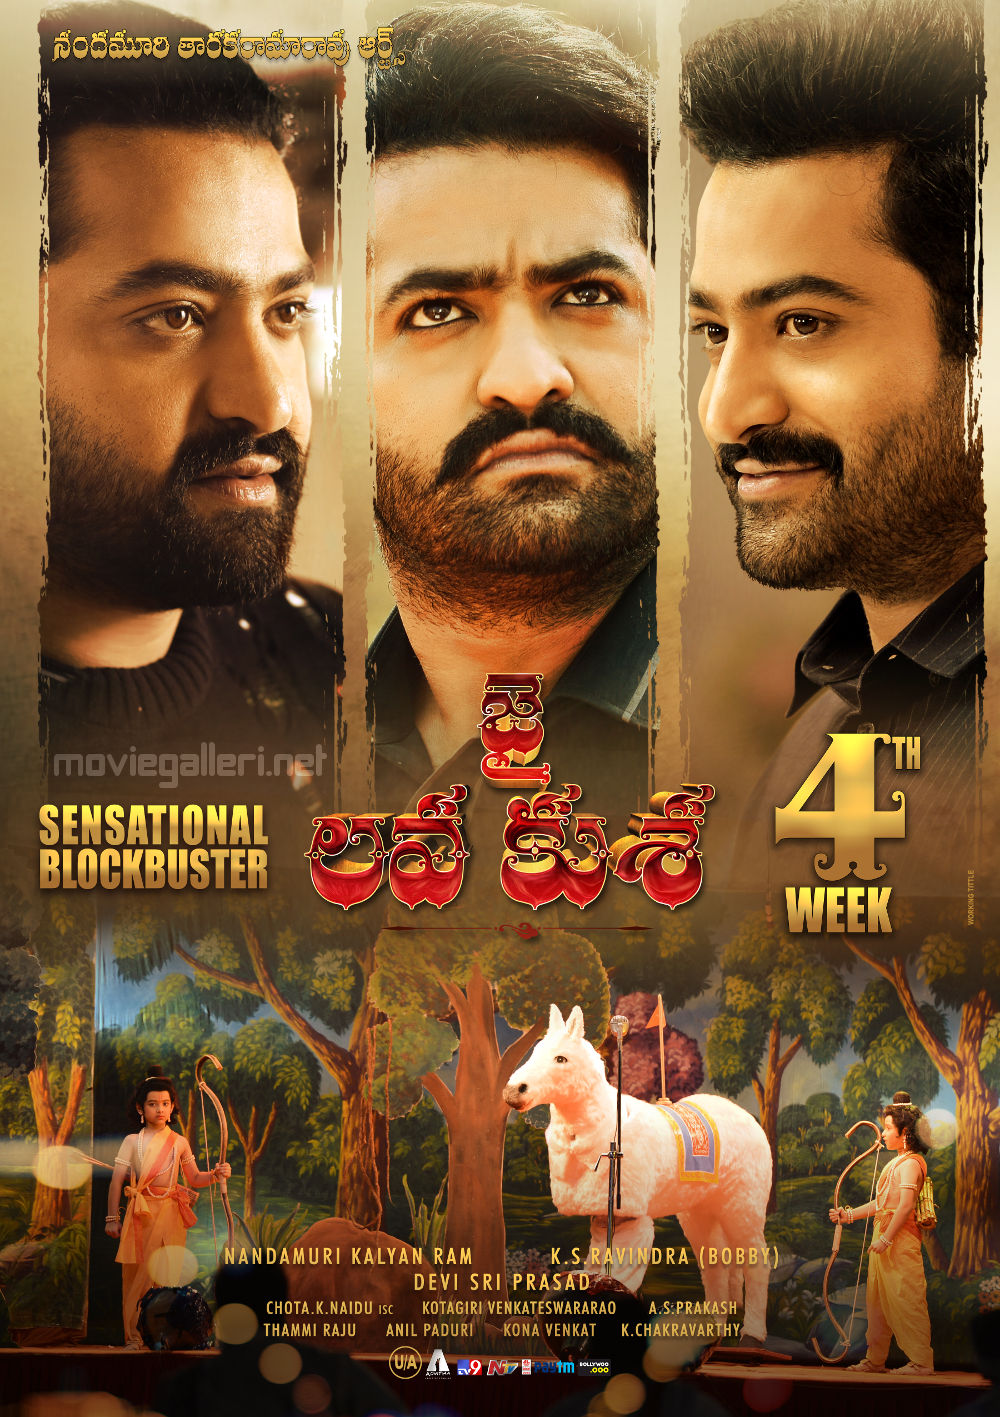 NTR Jai Lava Kusa 4th Week Posters | New Movie Posters